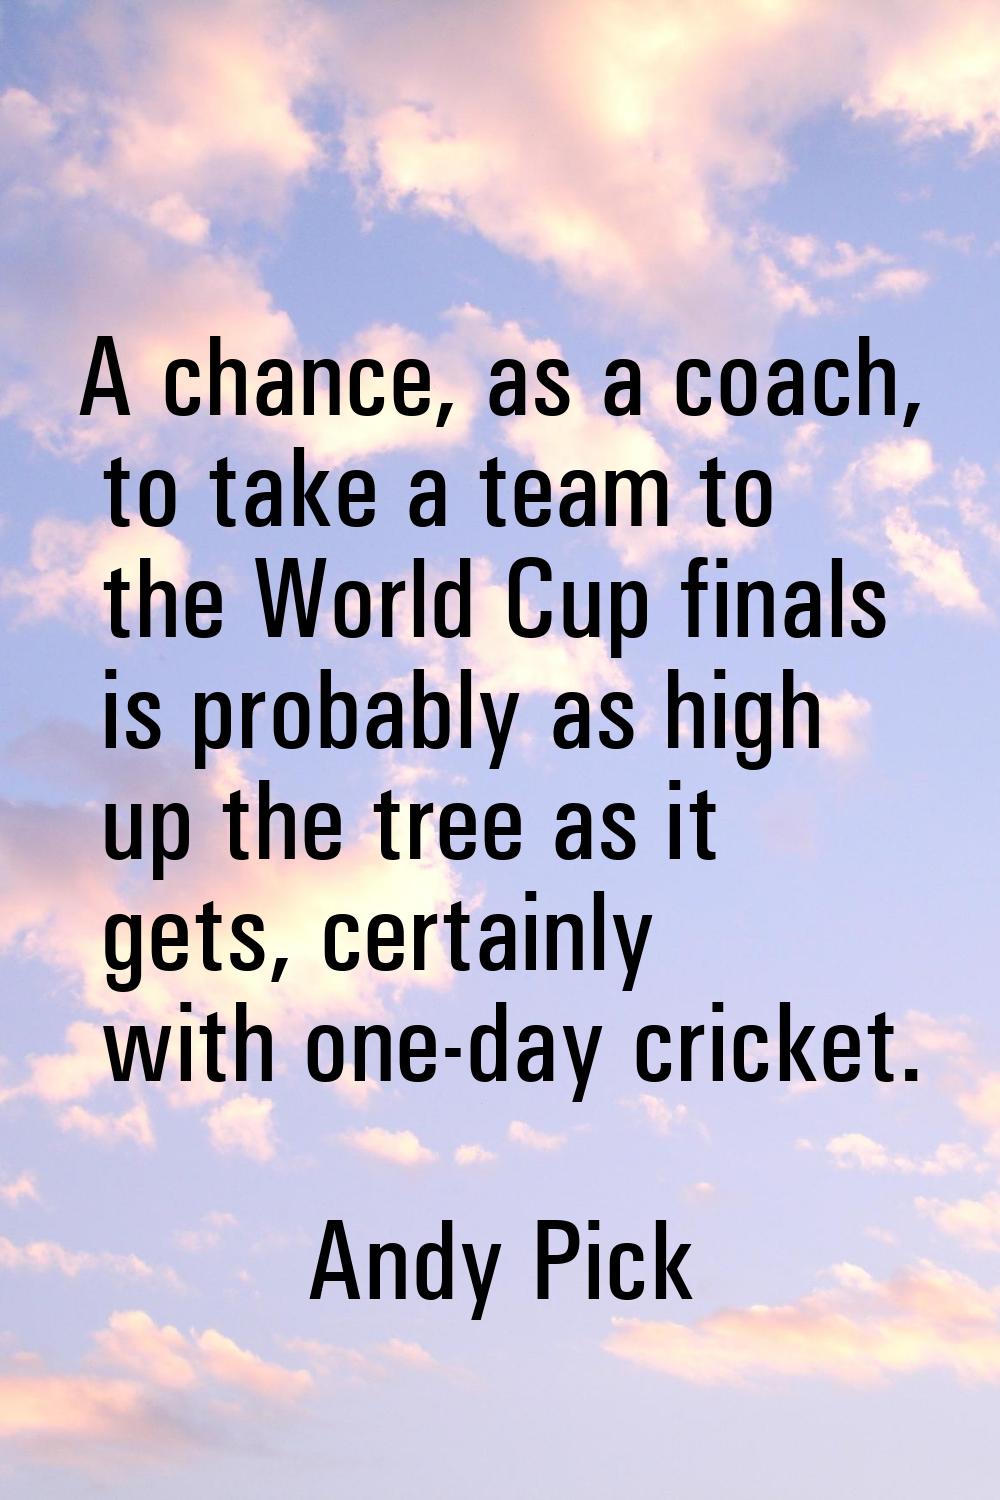 A chance, as a coach, to take a team to the World Cup finals is probably as high up the tree as it 